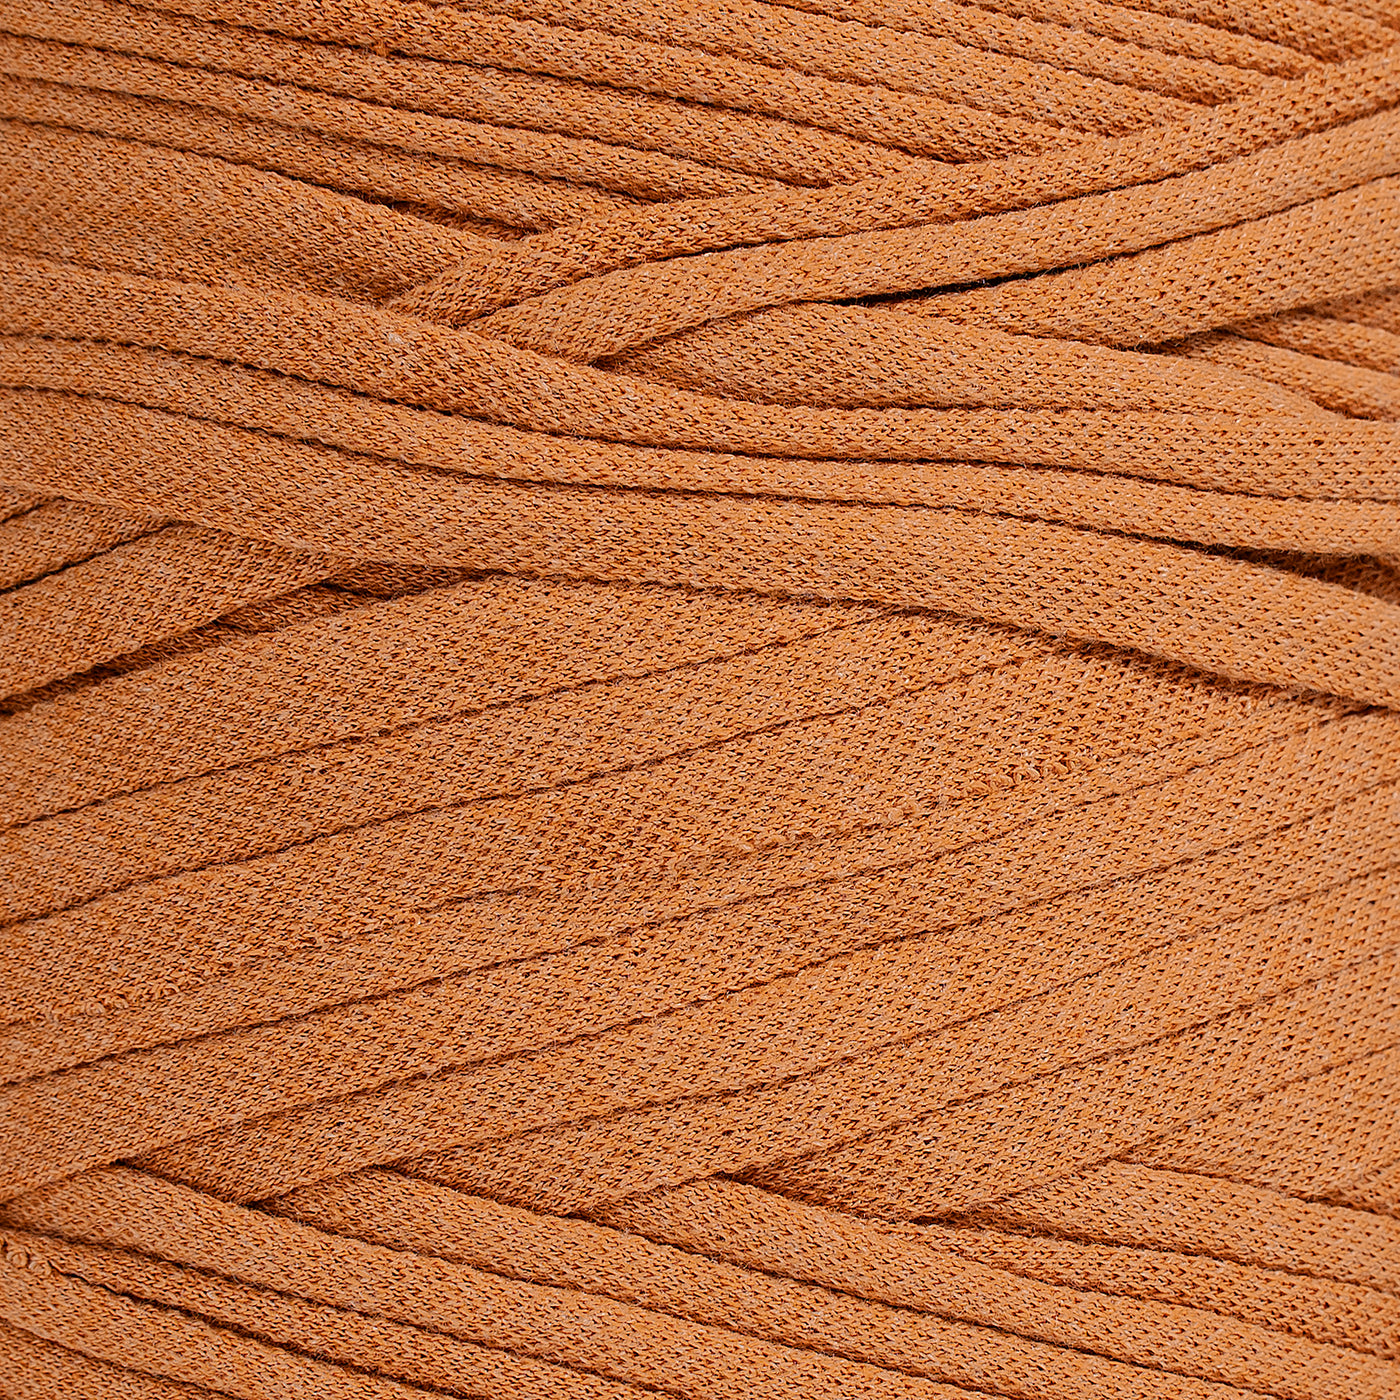 Recycled T-Shirt Fabric Yarn - Apricot Color